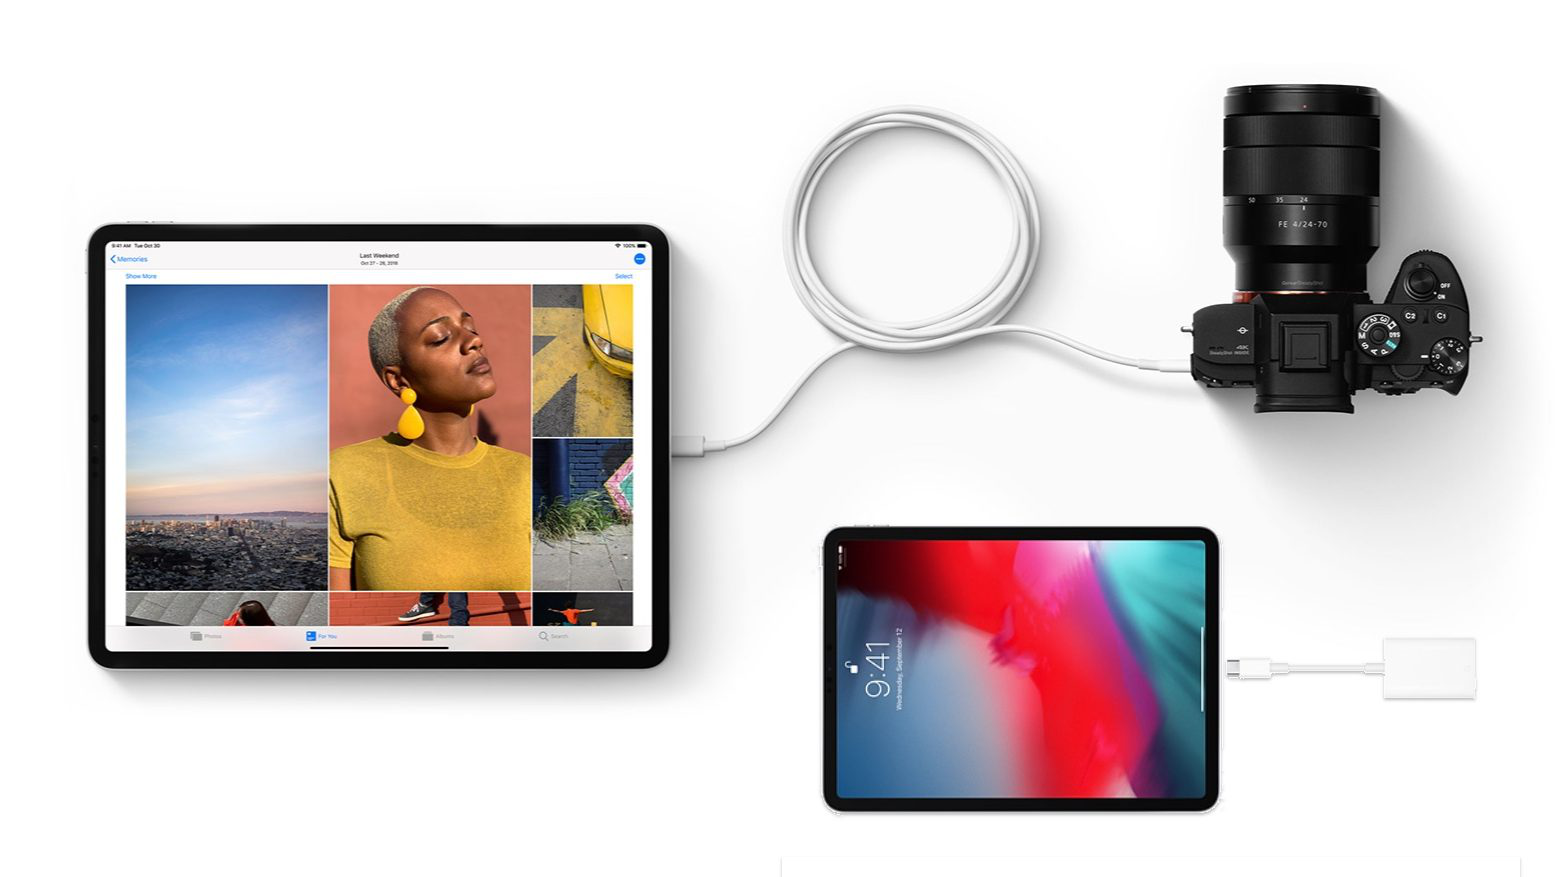 Krønike Gods Løsne What Can You Connect to the iPad Pro 2018 with USB-C? – Zendure